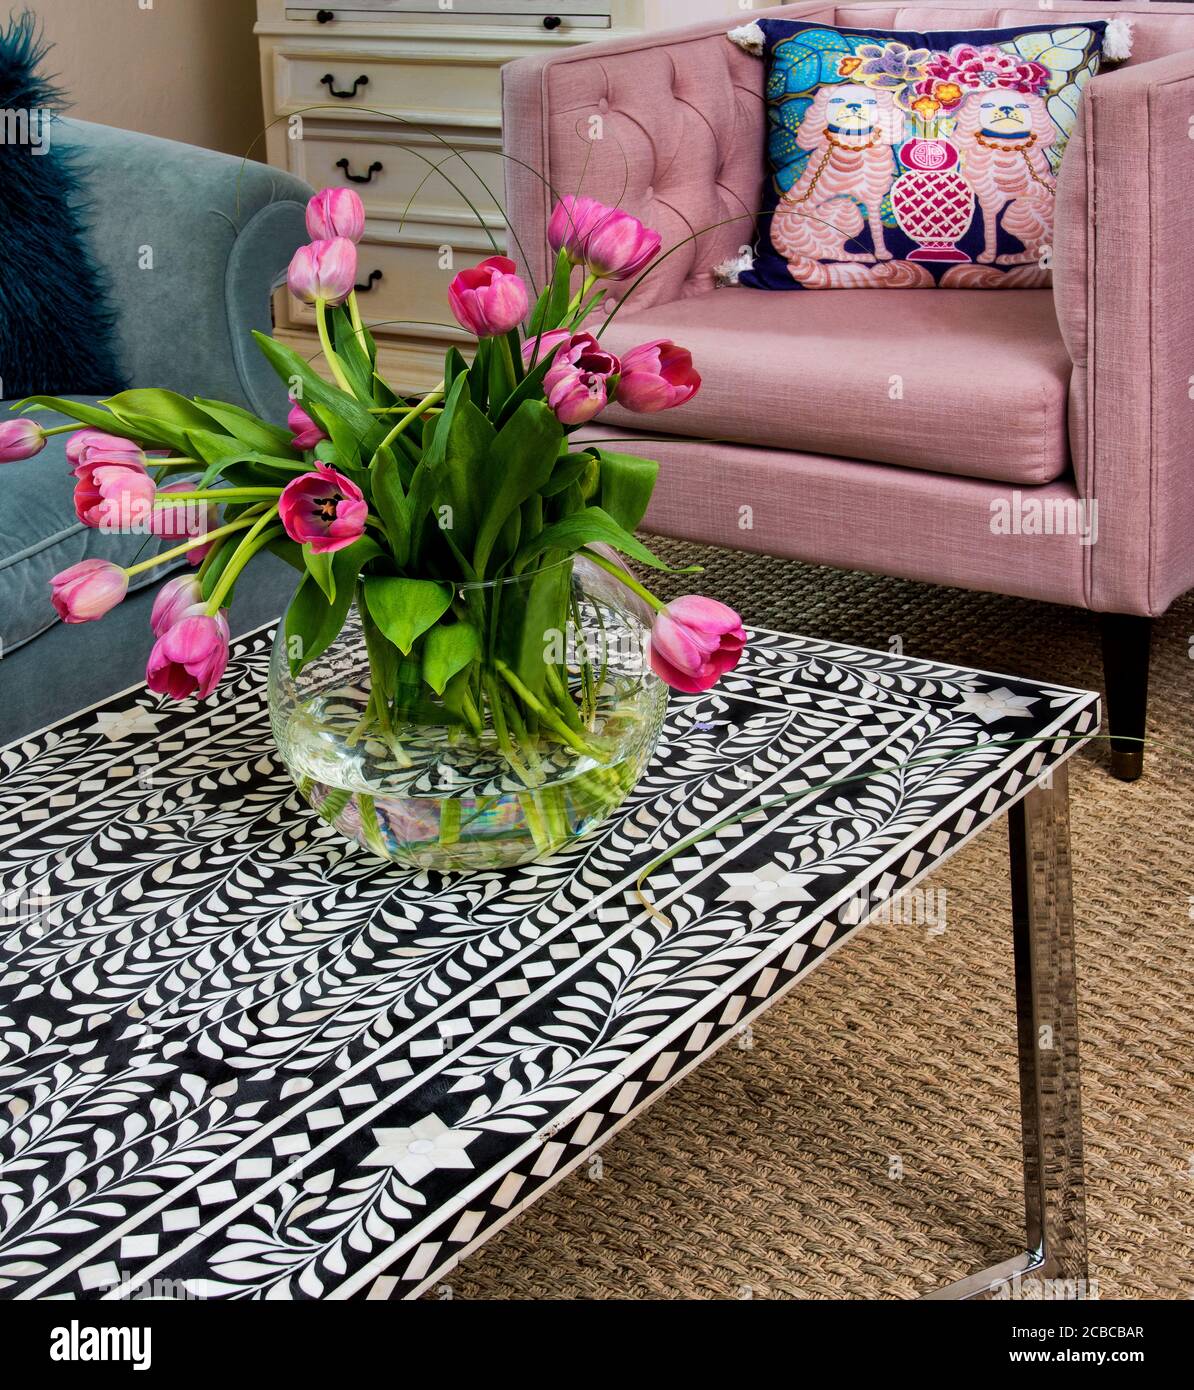 Black and White Mosaic Coffee Table with Pink Tulips in Vase Stock Photo